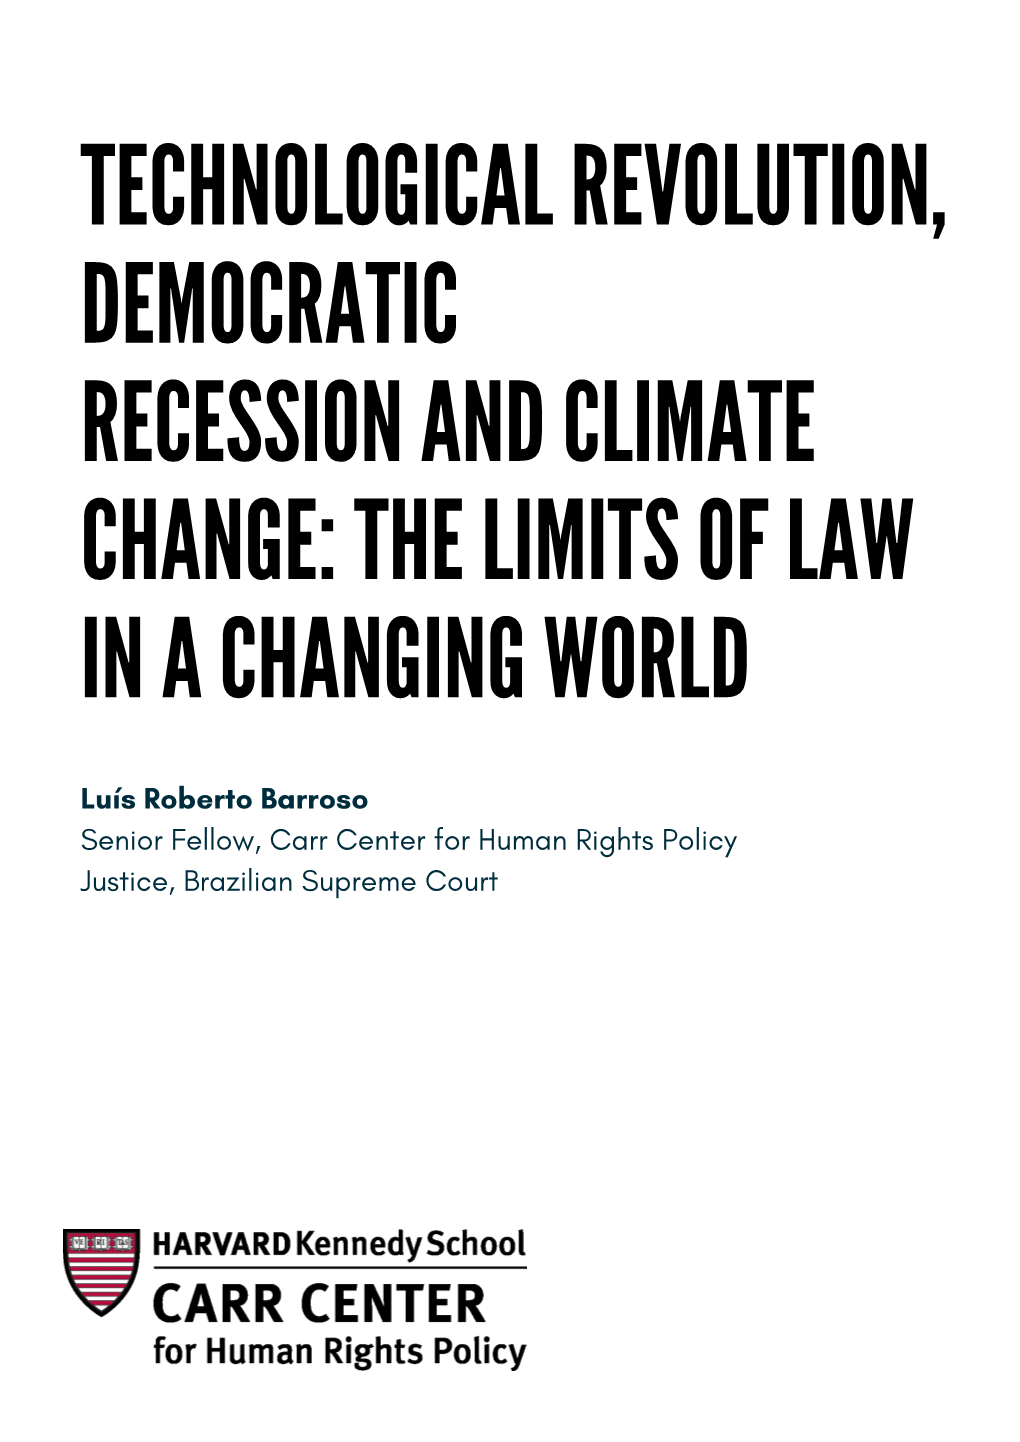 Technological Revolution, Democratic Recession and Climate Change: the Limits of Law in a Changing World